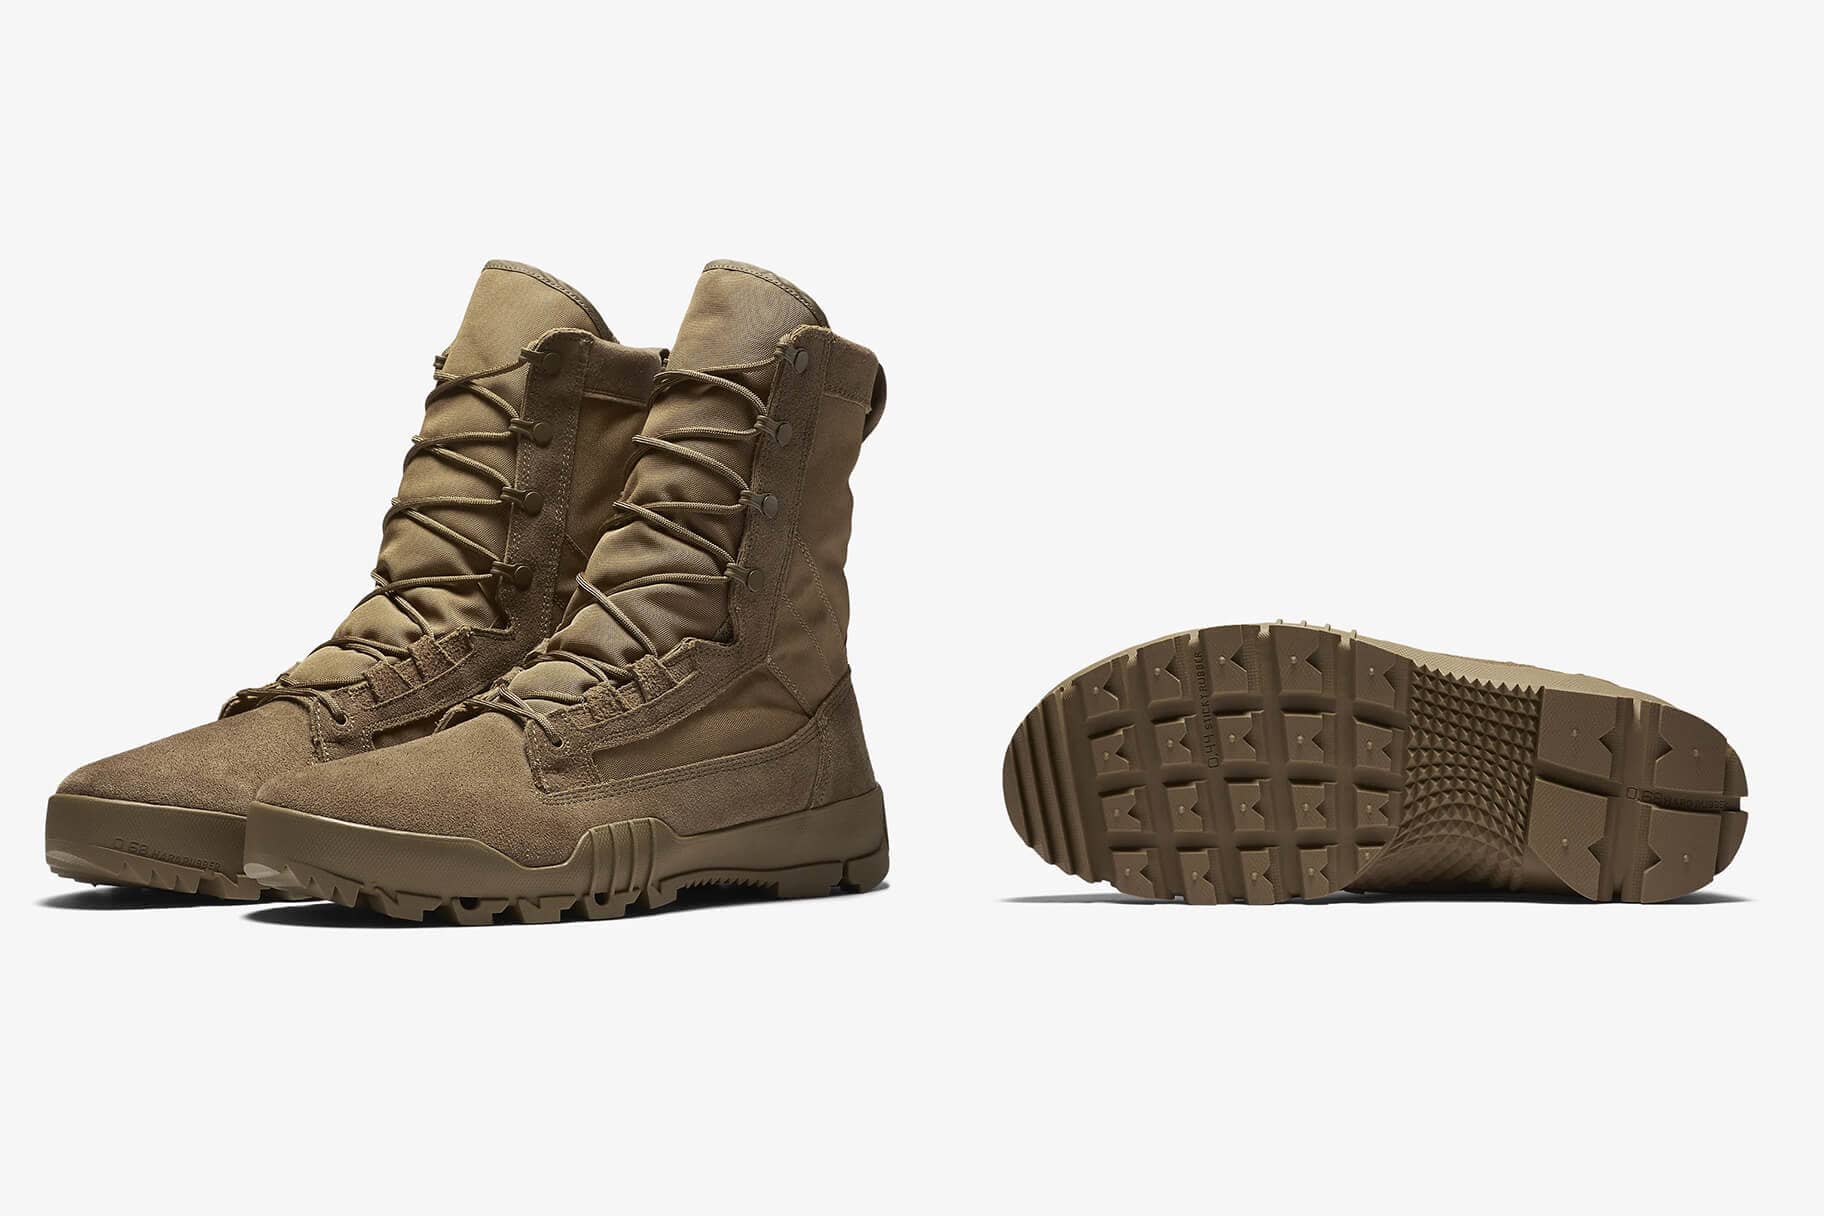 The Best Tactical Boots From Nike.com